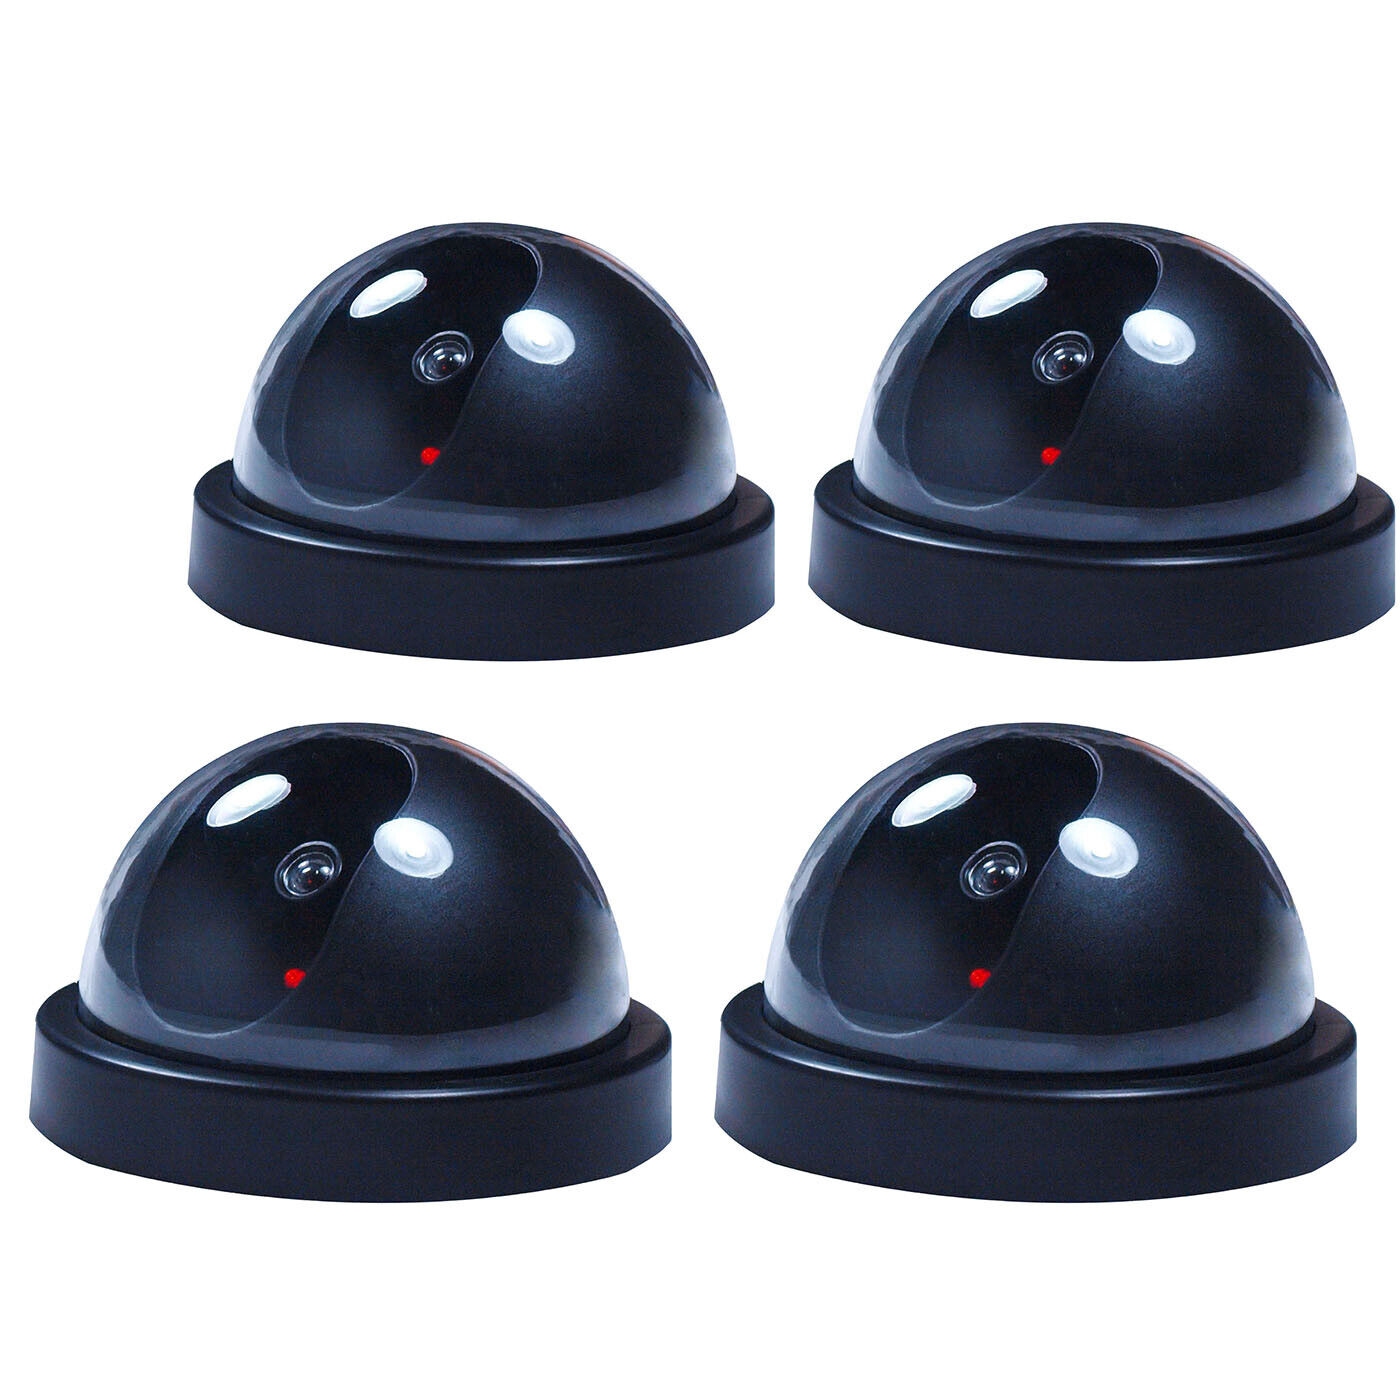 4 PCS Fake Dummy Dome Surveillance Security Camera with LED Record Light